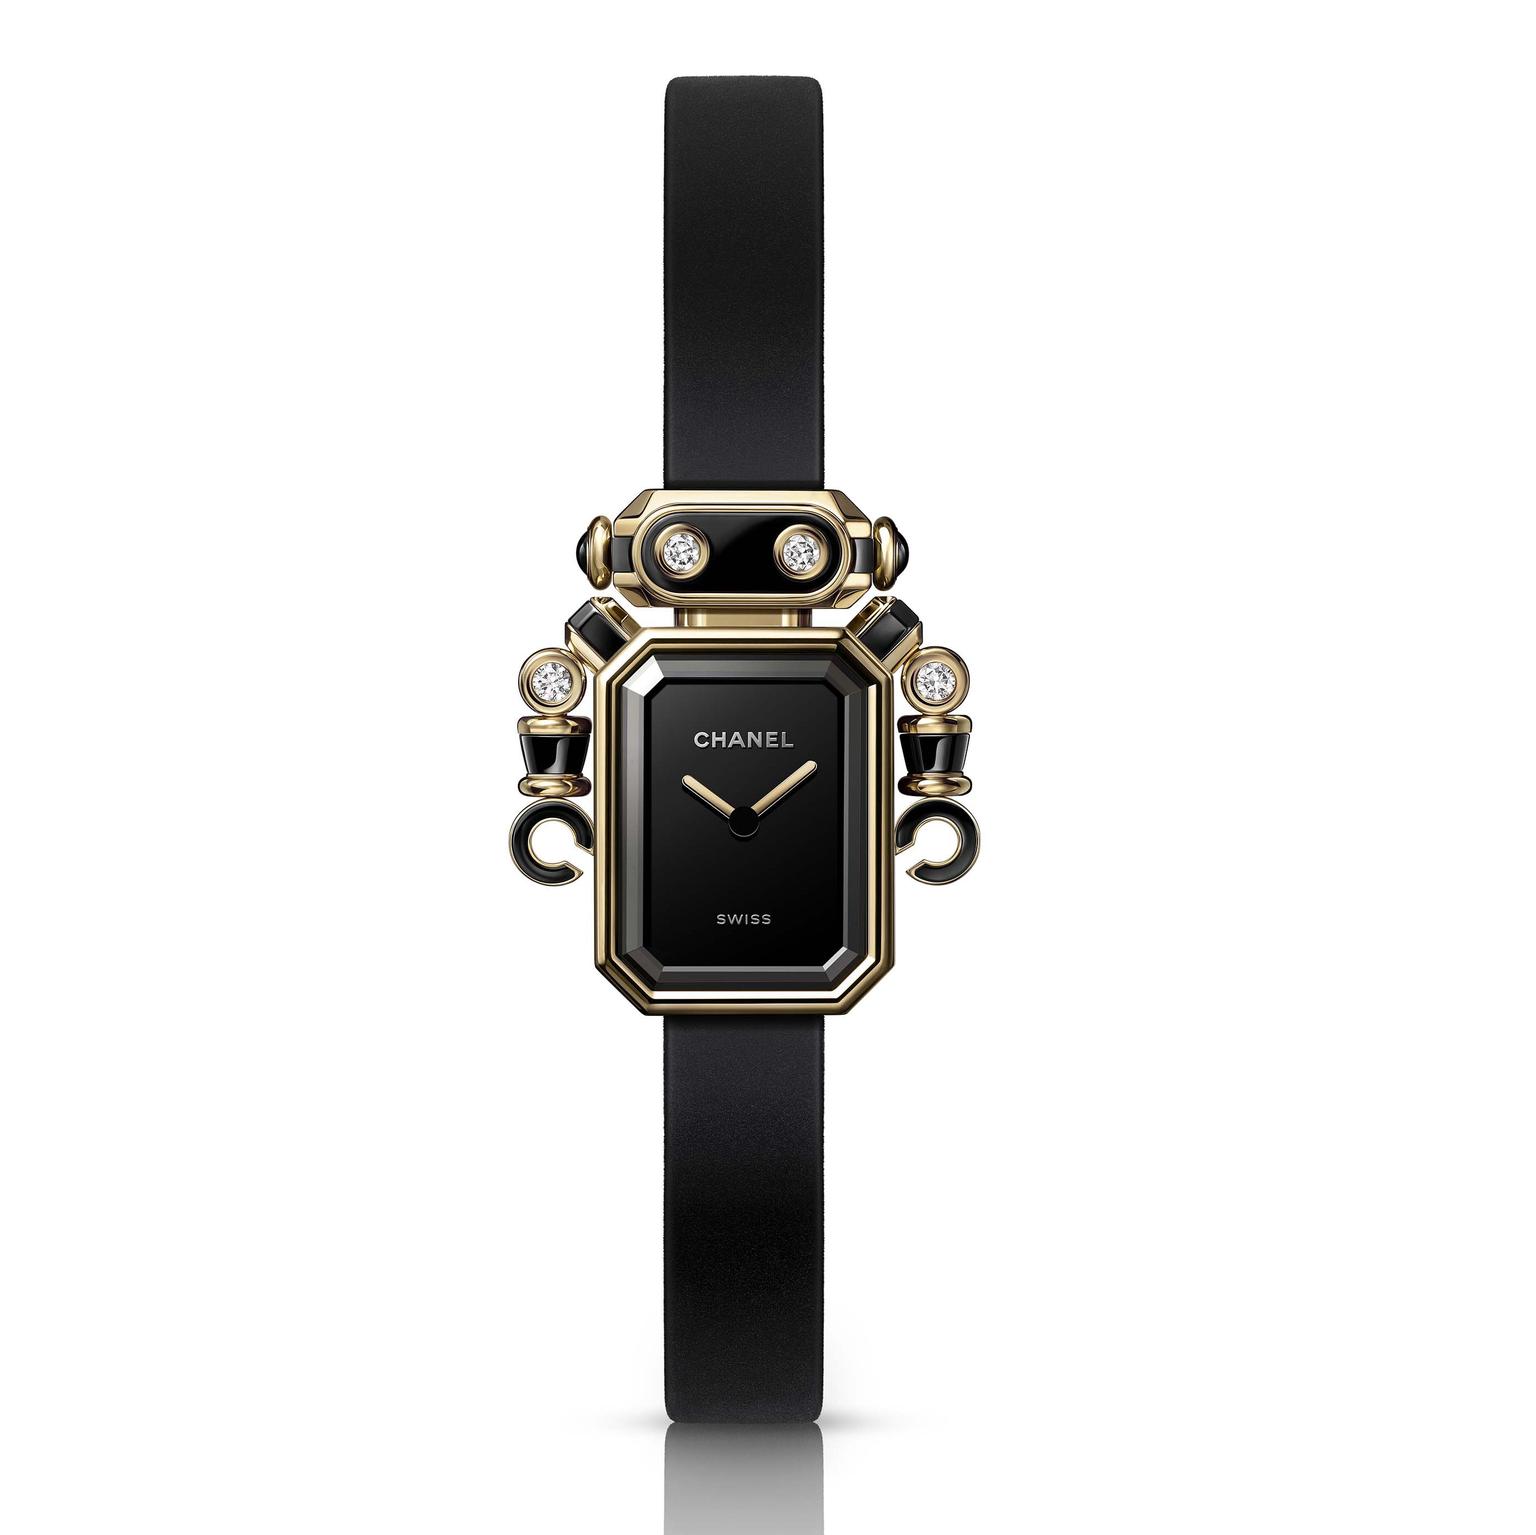 Premiere Robot watch by Chanel